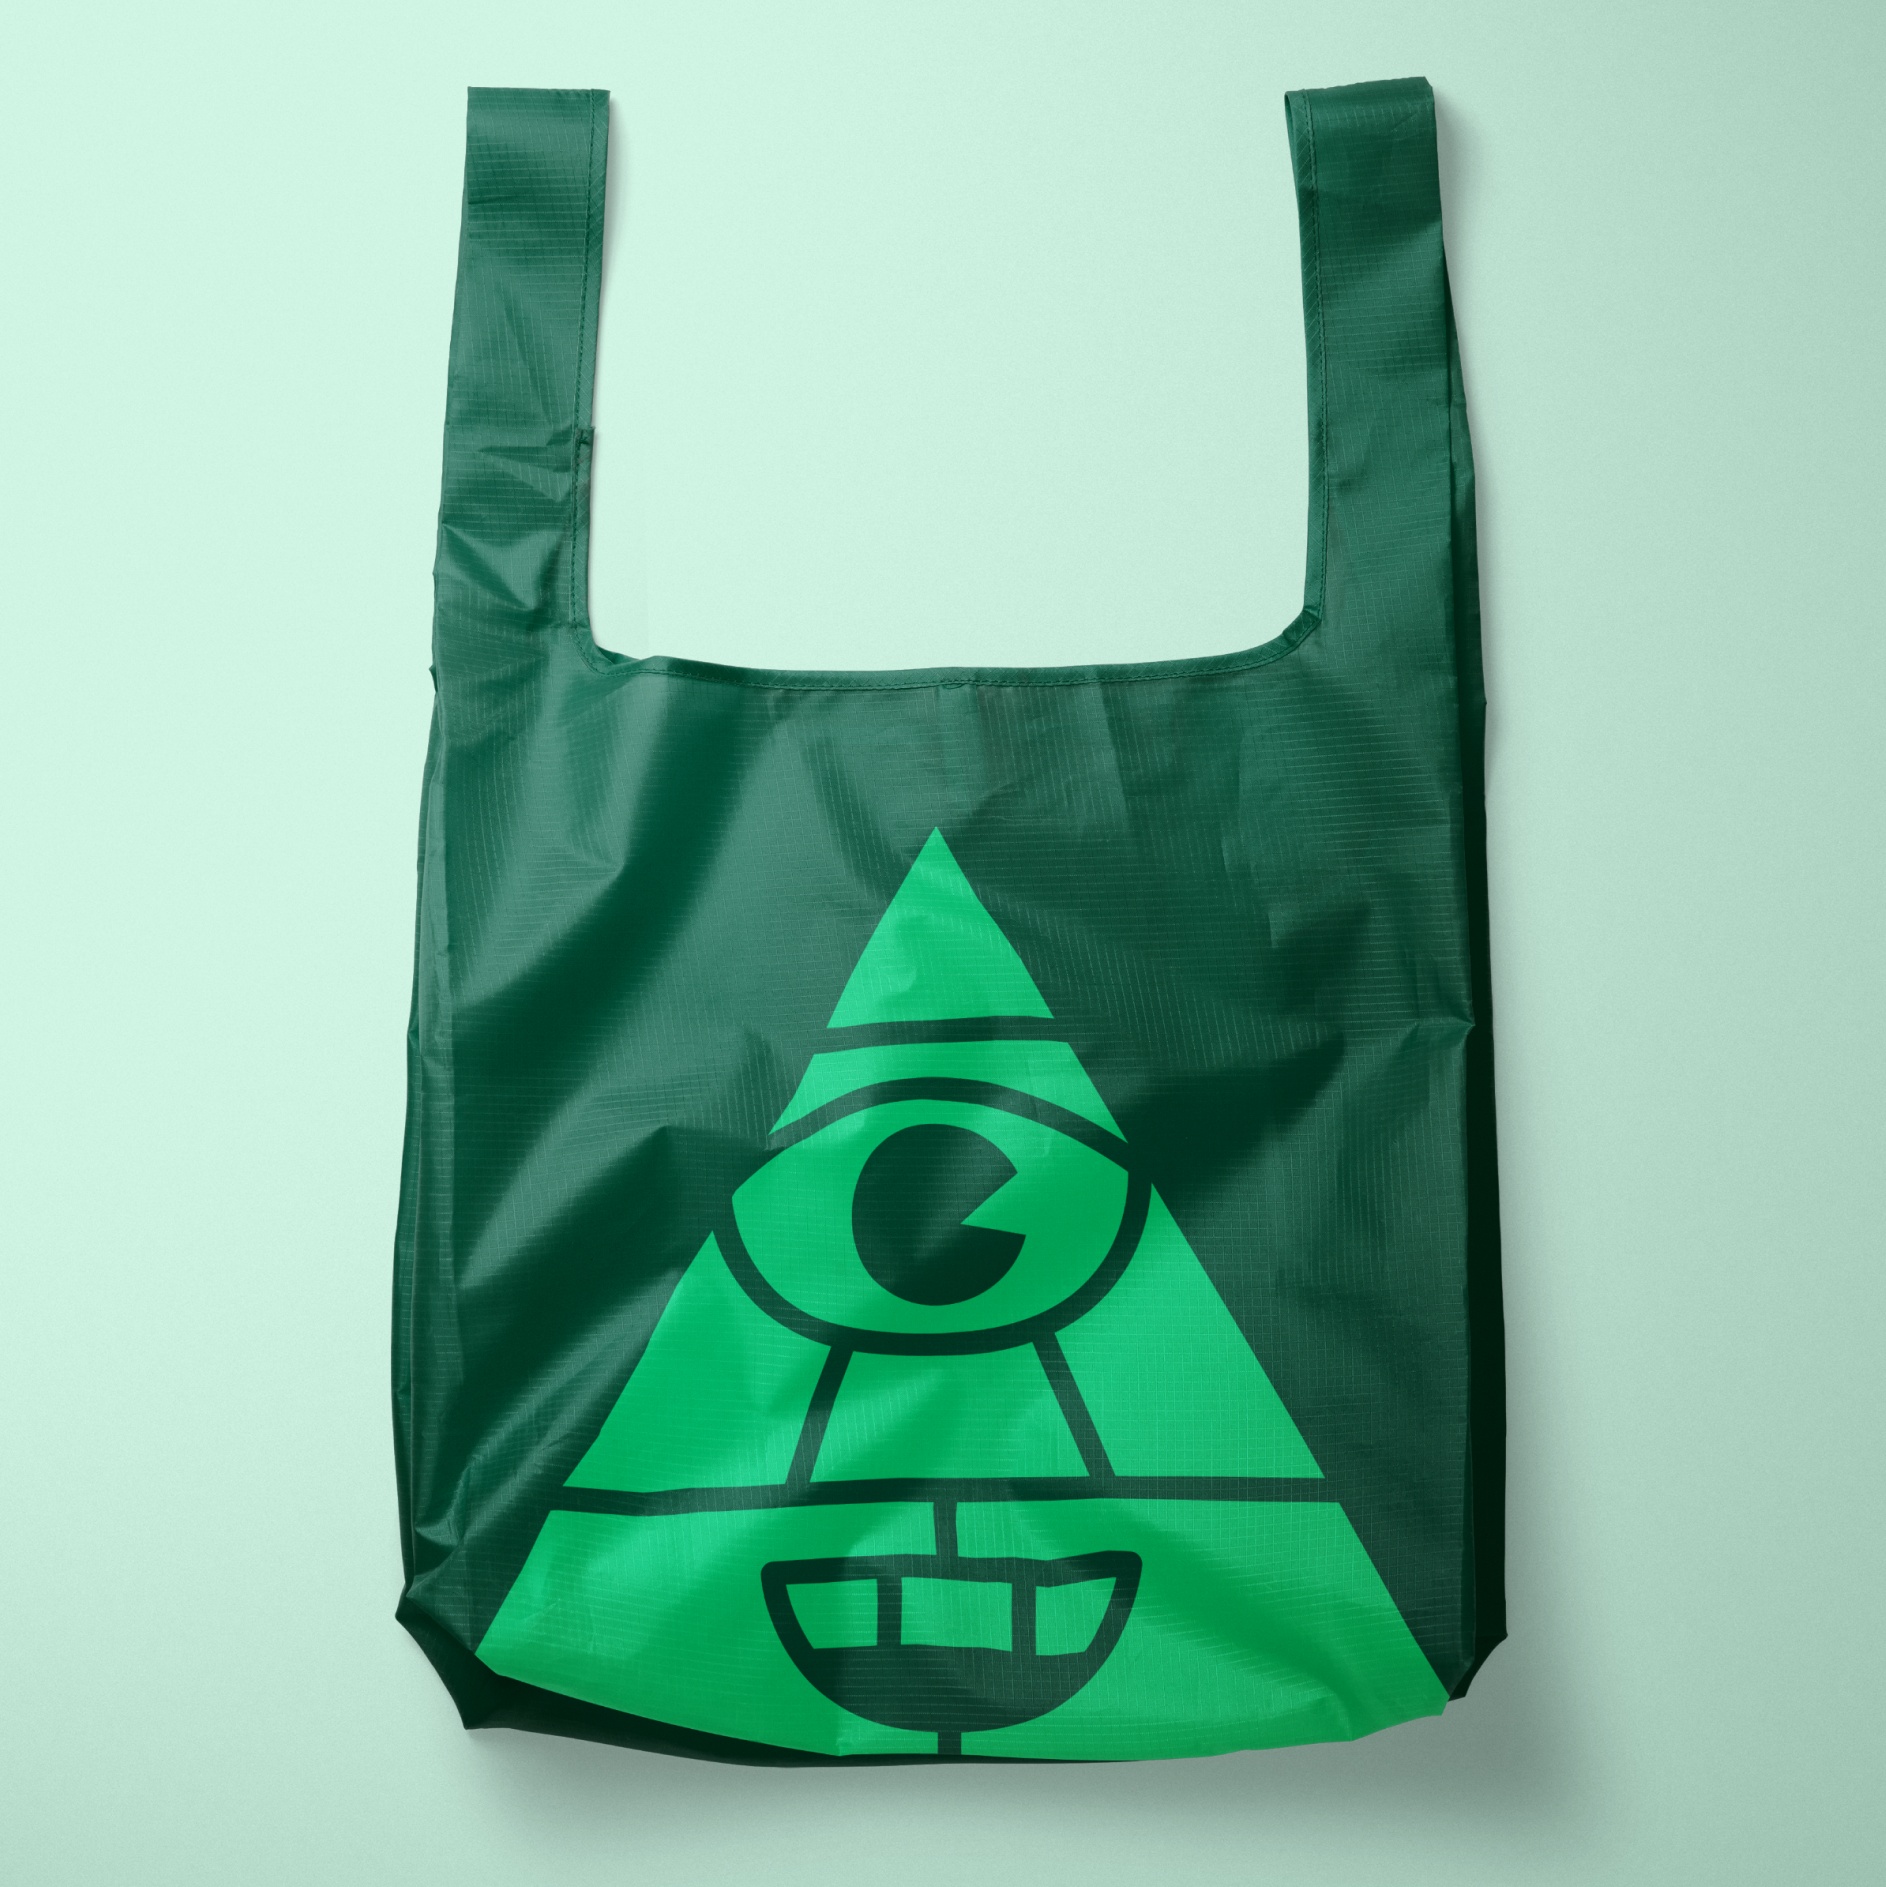 A custom Baggu bag showing one of the Expensify graphics, an all-seeing-eye.